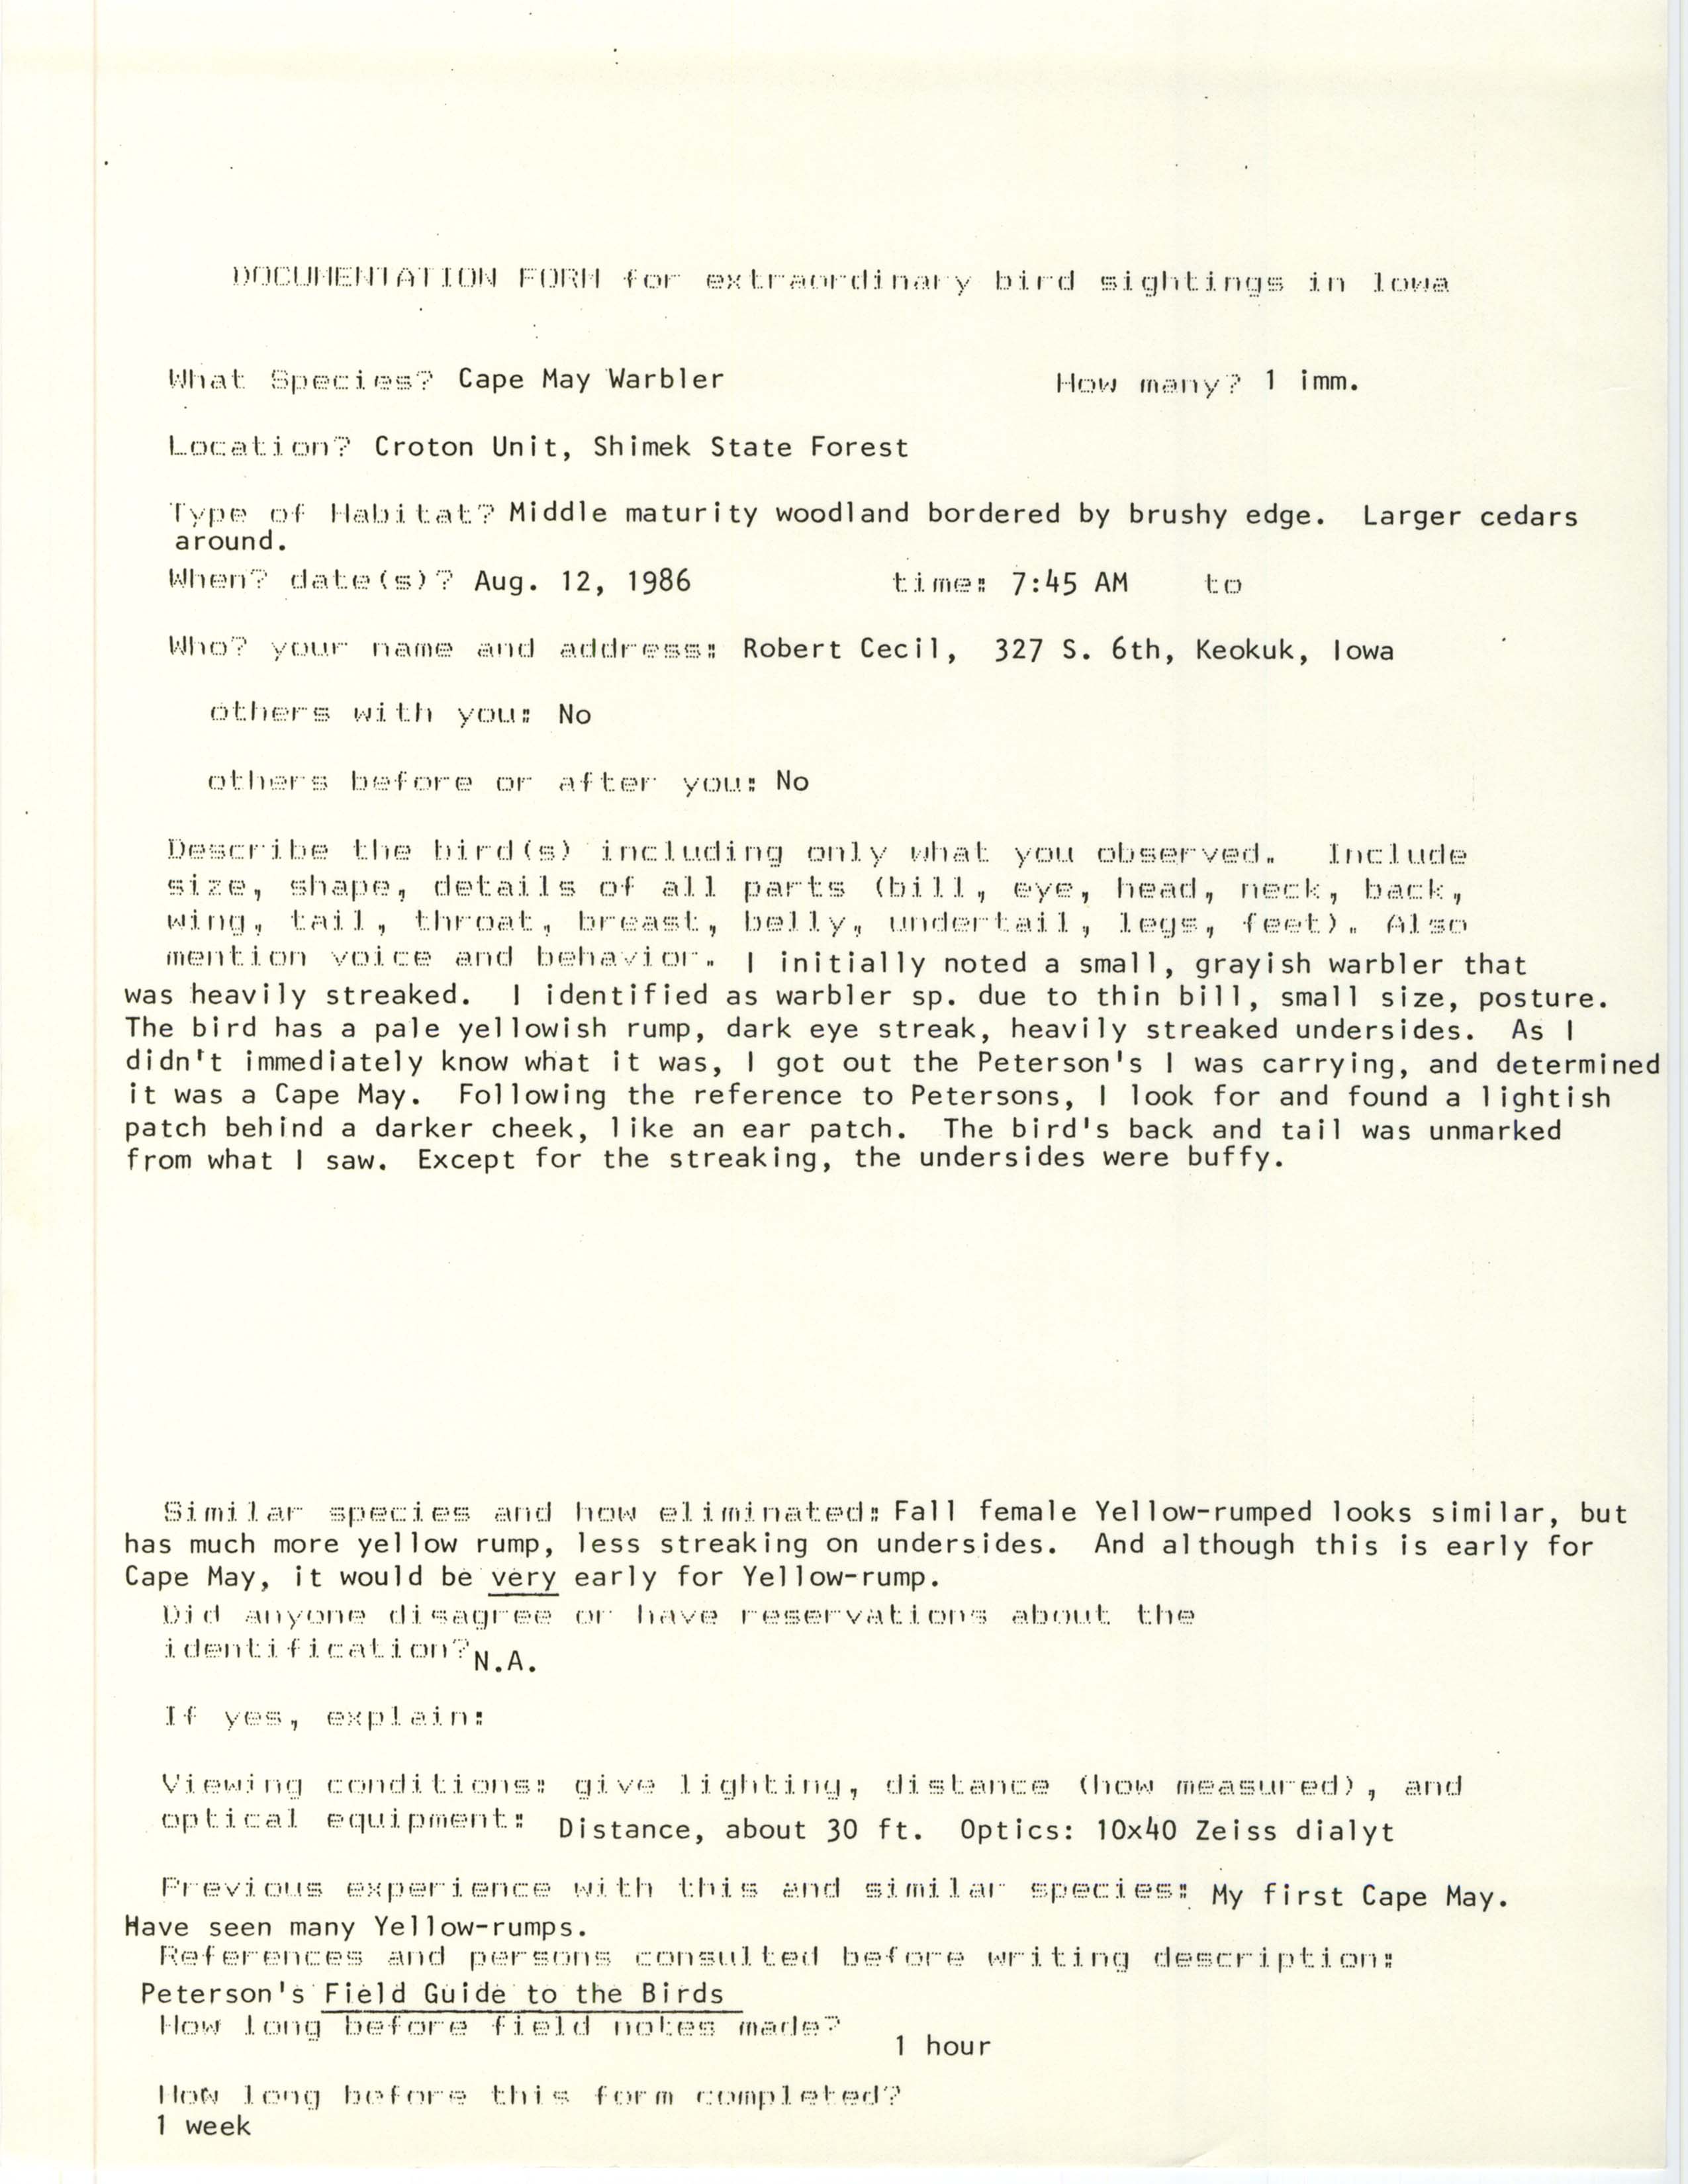 Rare bird documentation form for Cape May Warbler at the Croton Unit in the Shimek State Forest, 1986